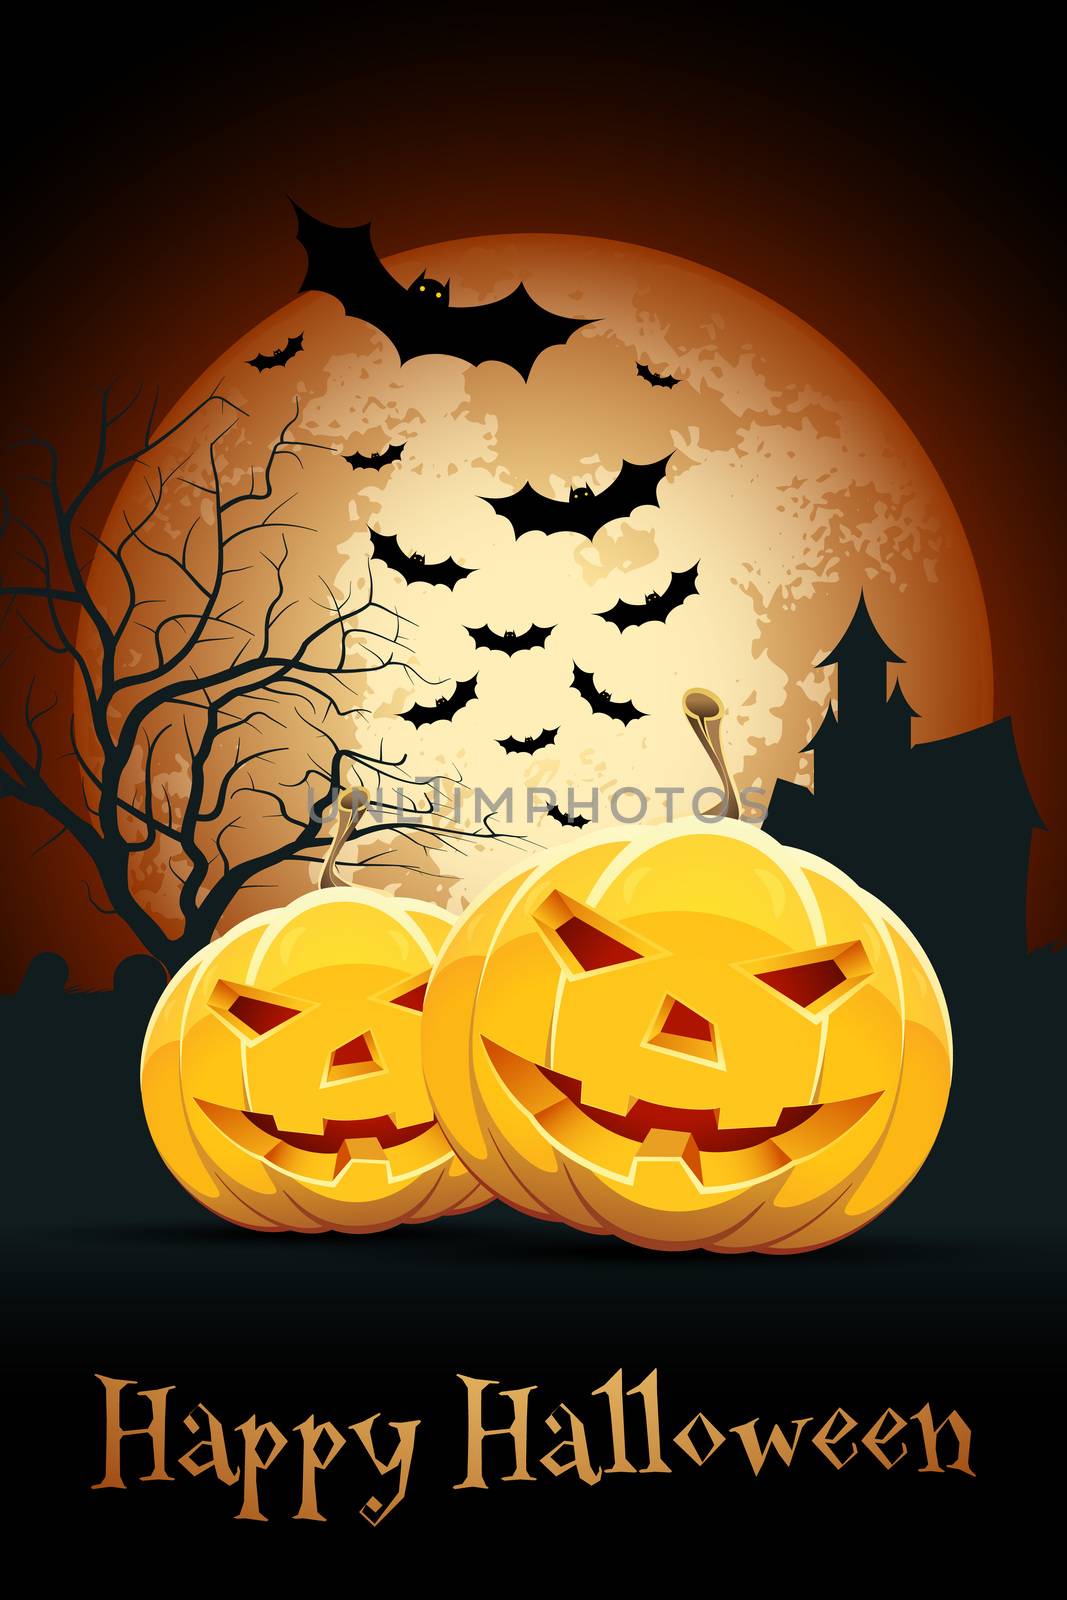 Halloween Party Card with Pumpkins, Bats and Haunted House